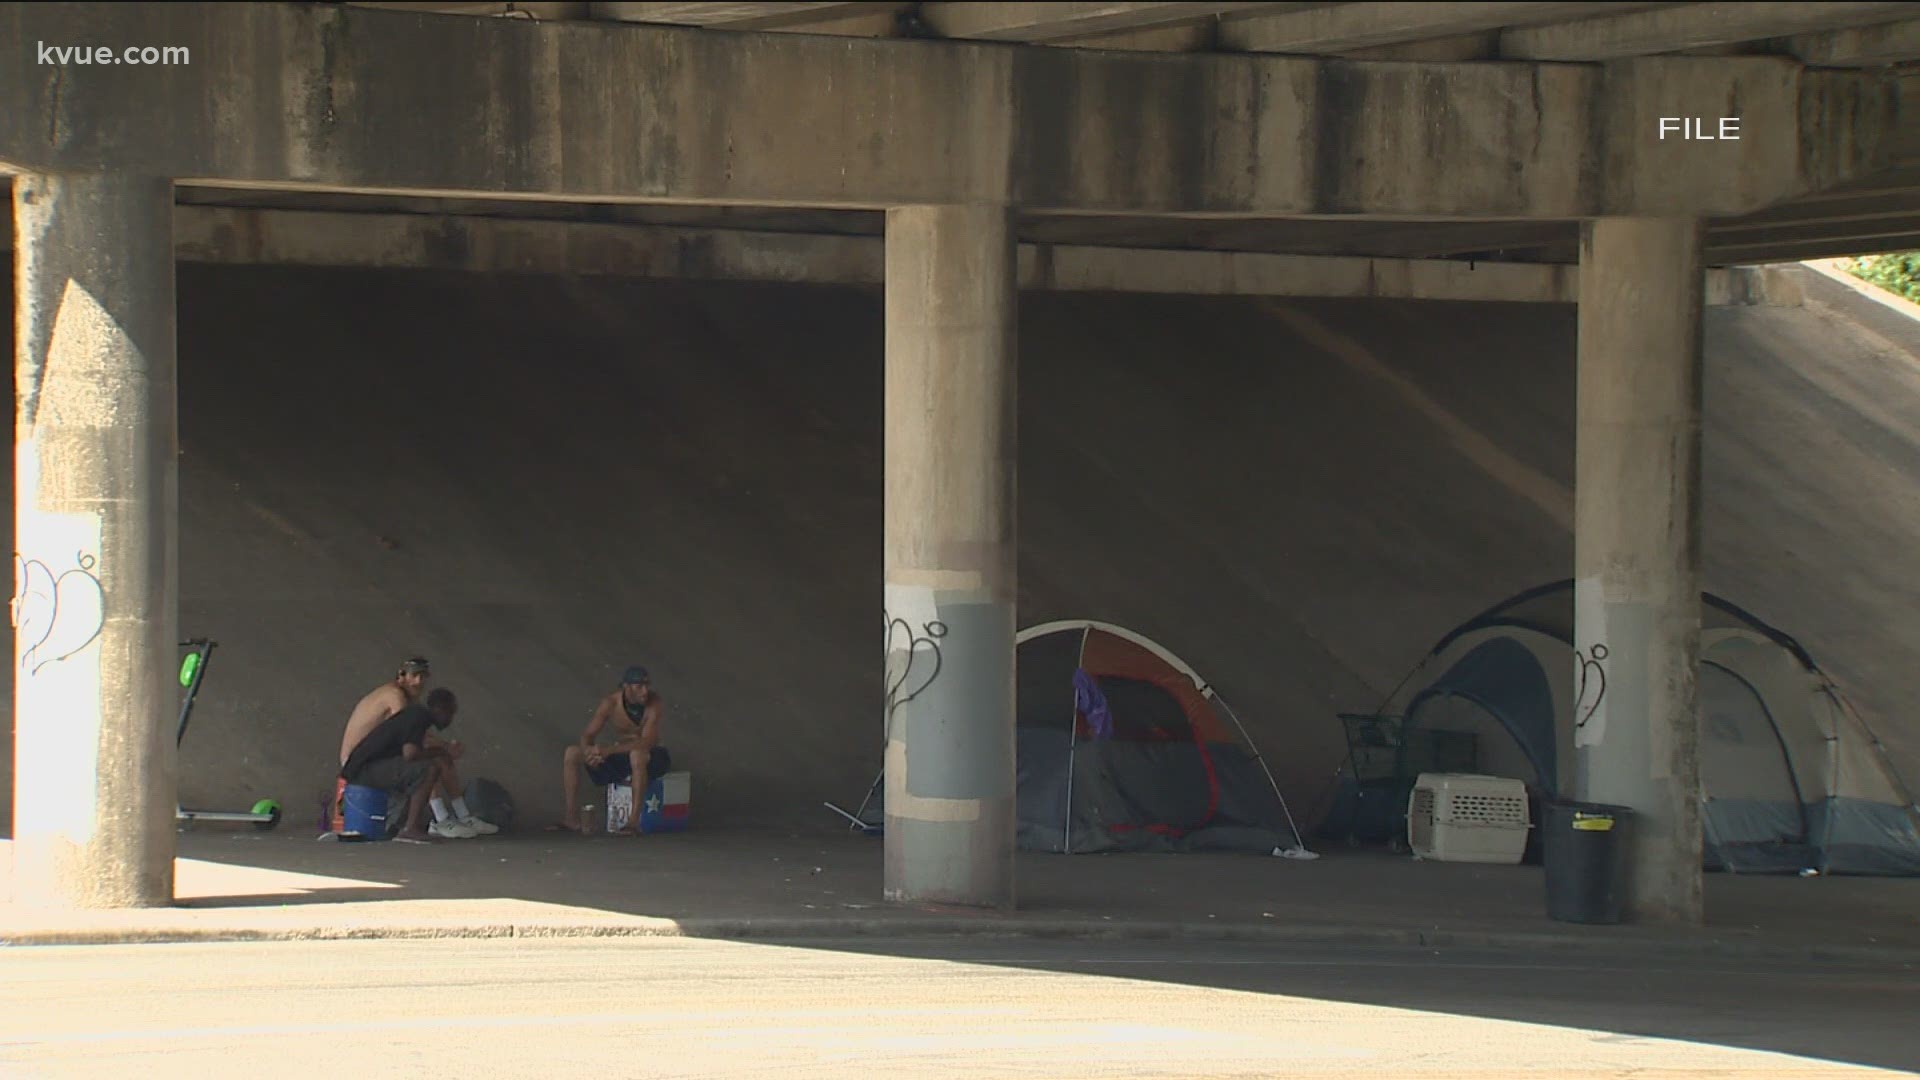 The City of Austin is currently in Phase 2 of its homeless camping ban.